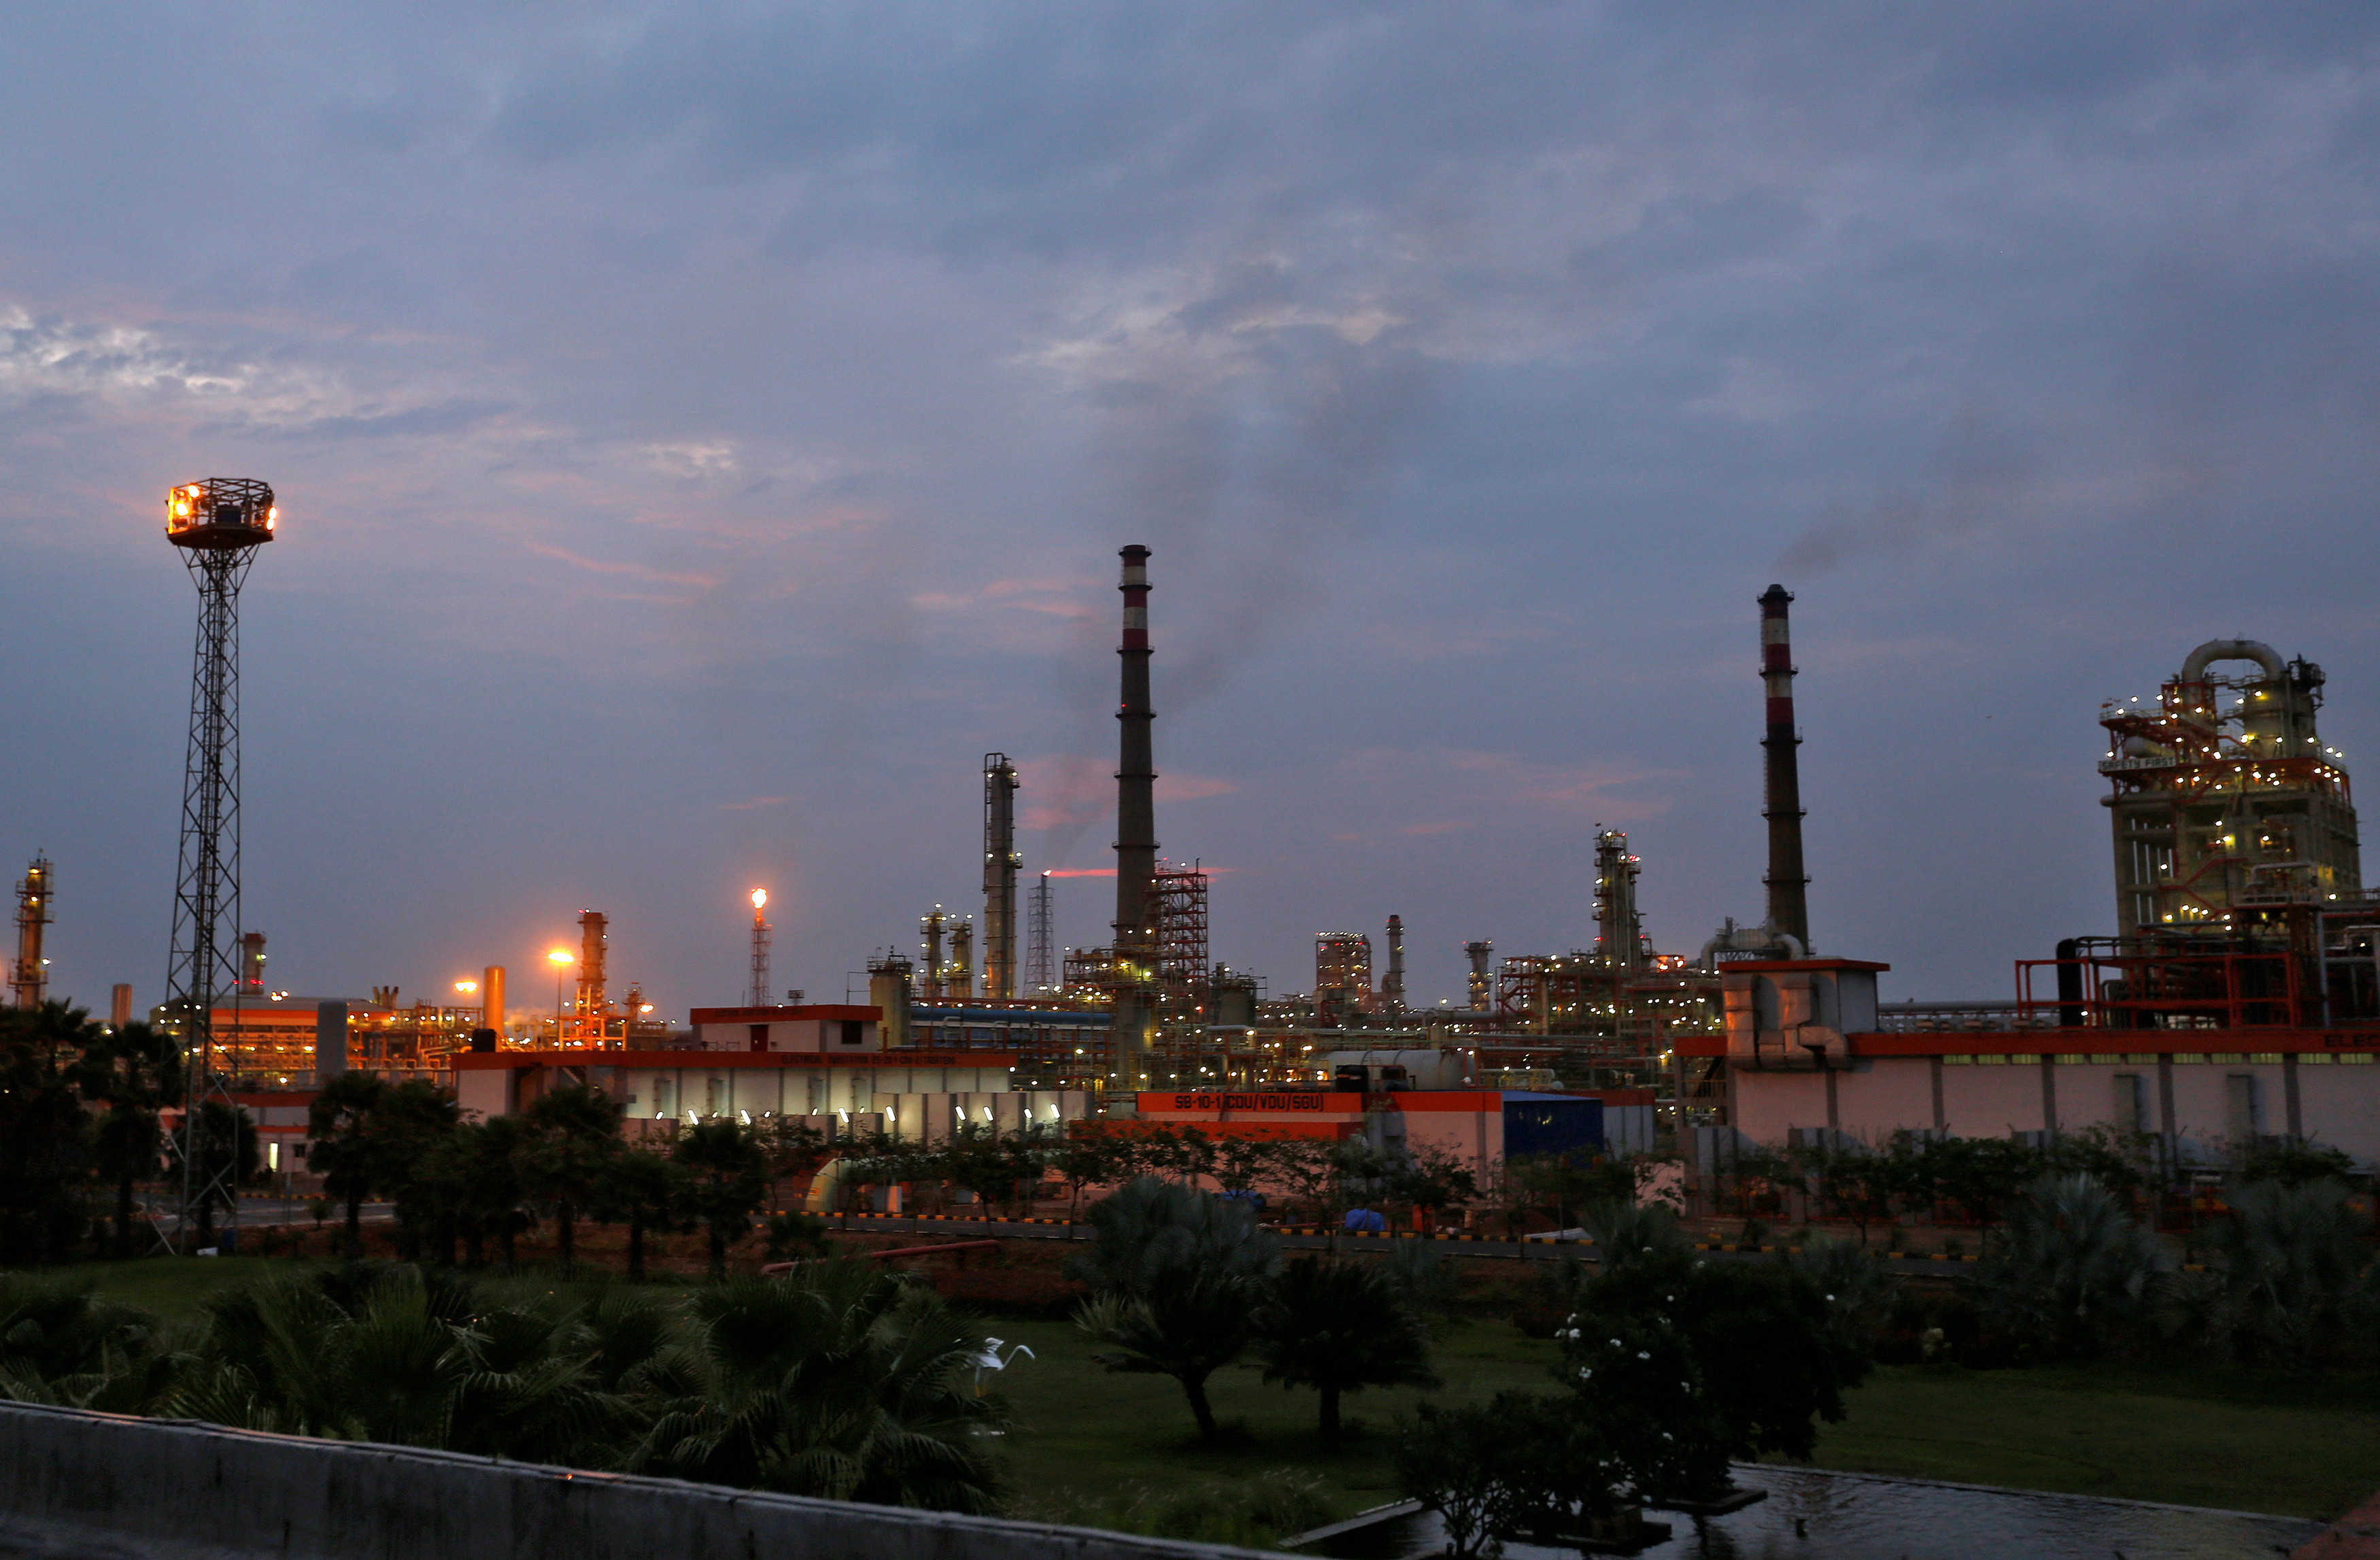 An oil refinery of Essar Oil, which runs India's second biggest private sector refinery, is pictured in Vadinar